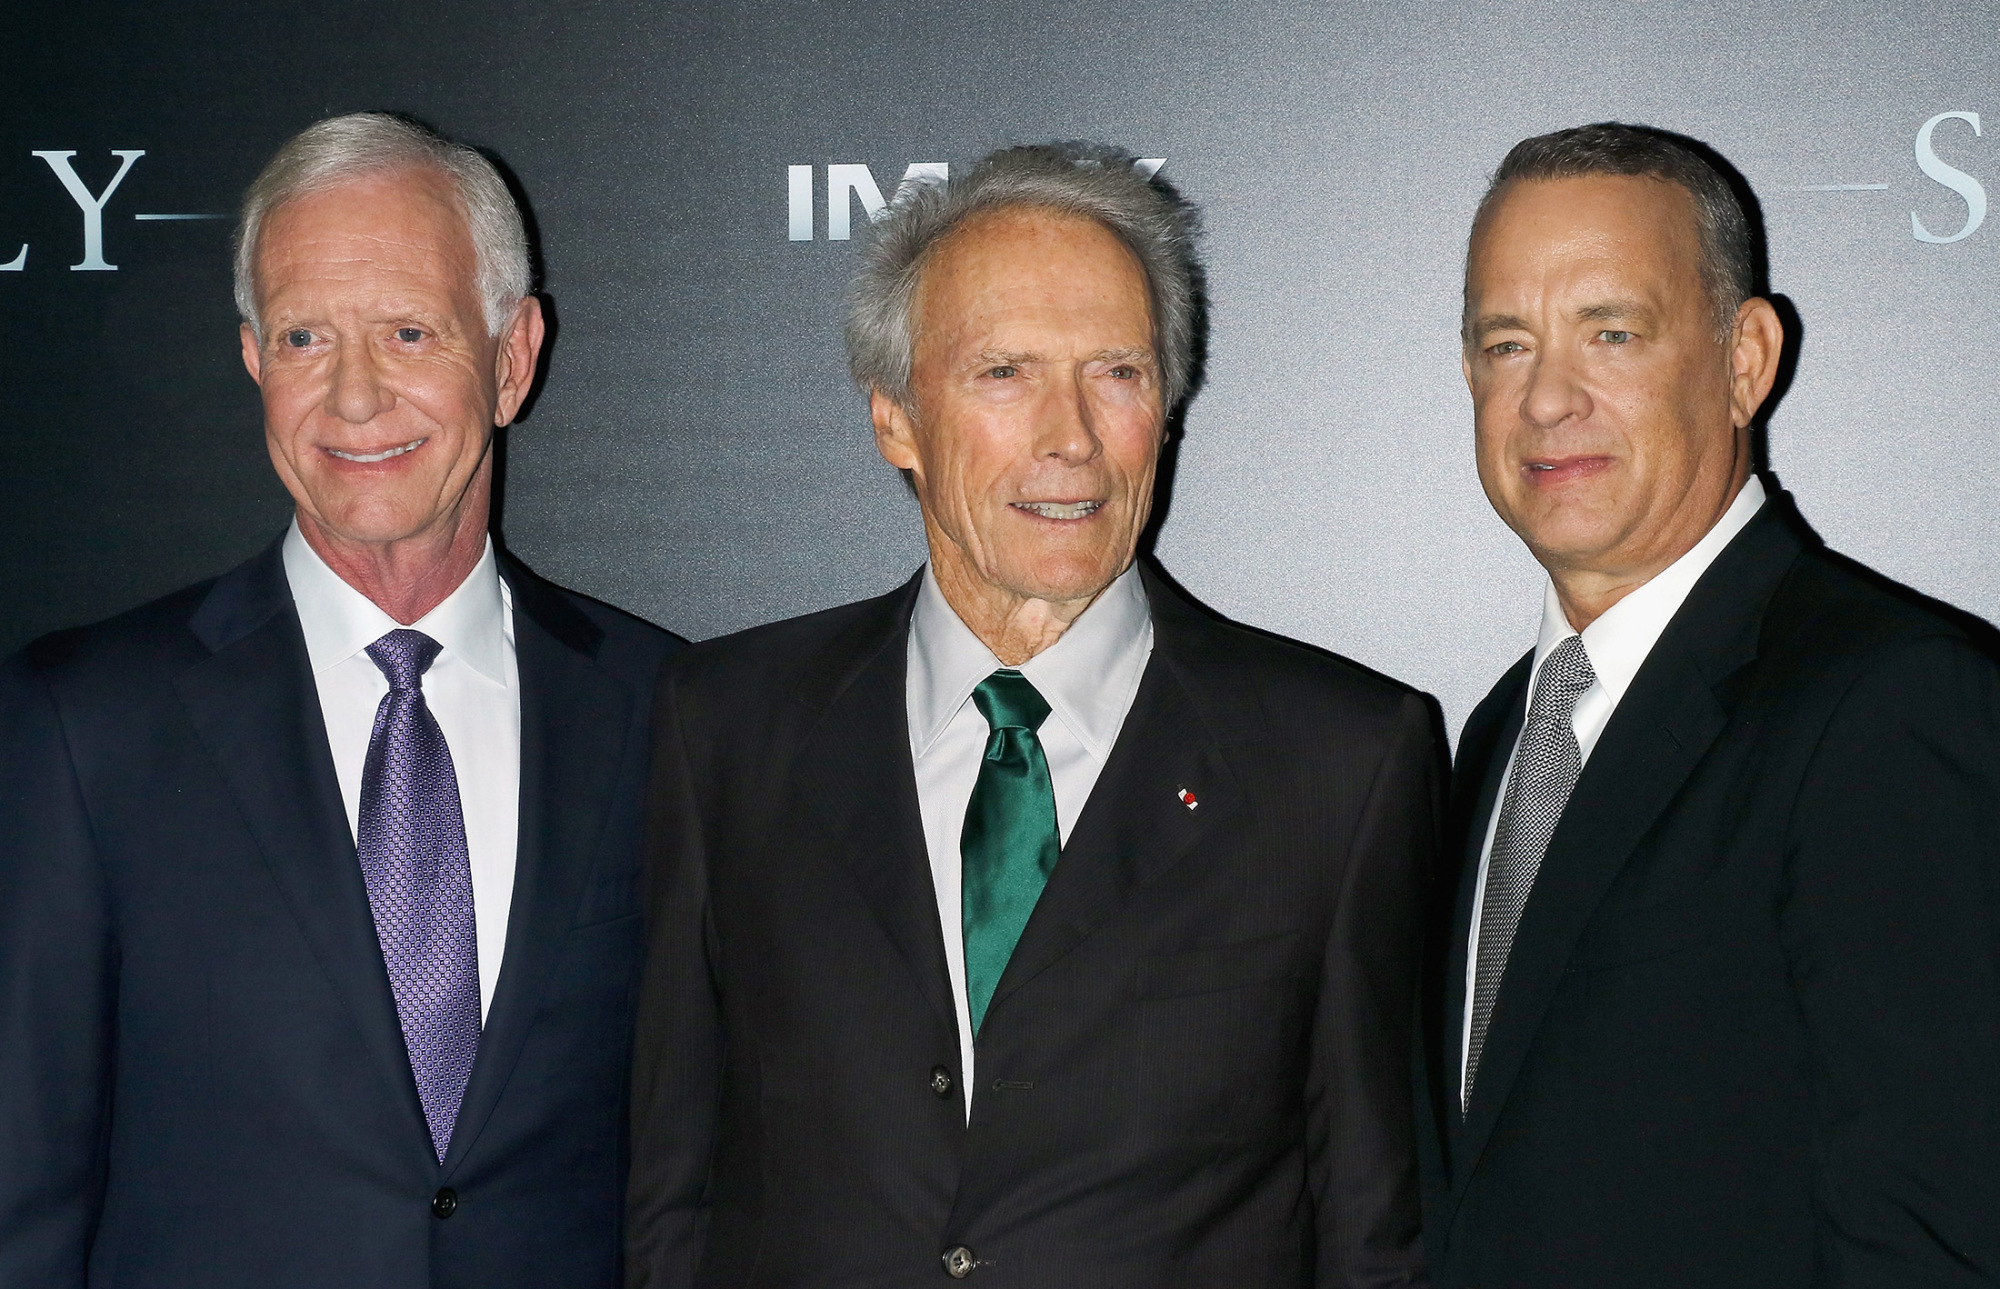 Retired airline captain Chesley 'Sully' Sullenberger, director Clint Eastwood and actor Tom Hanks attend the 'Sully' New York premiere on Sept. 6, 2016.
